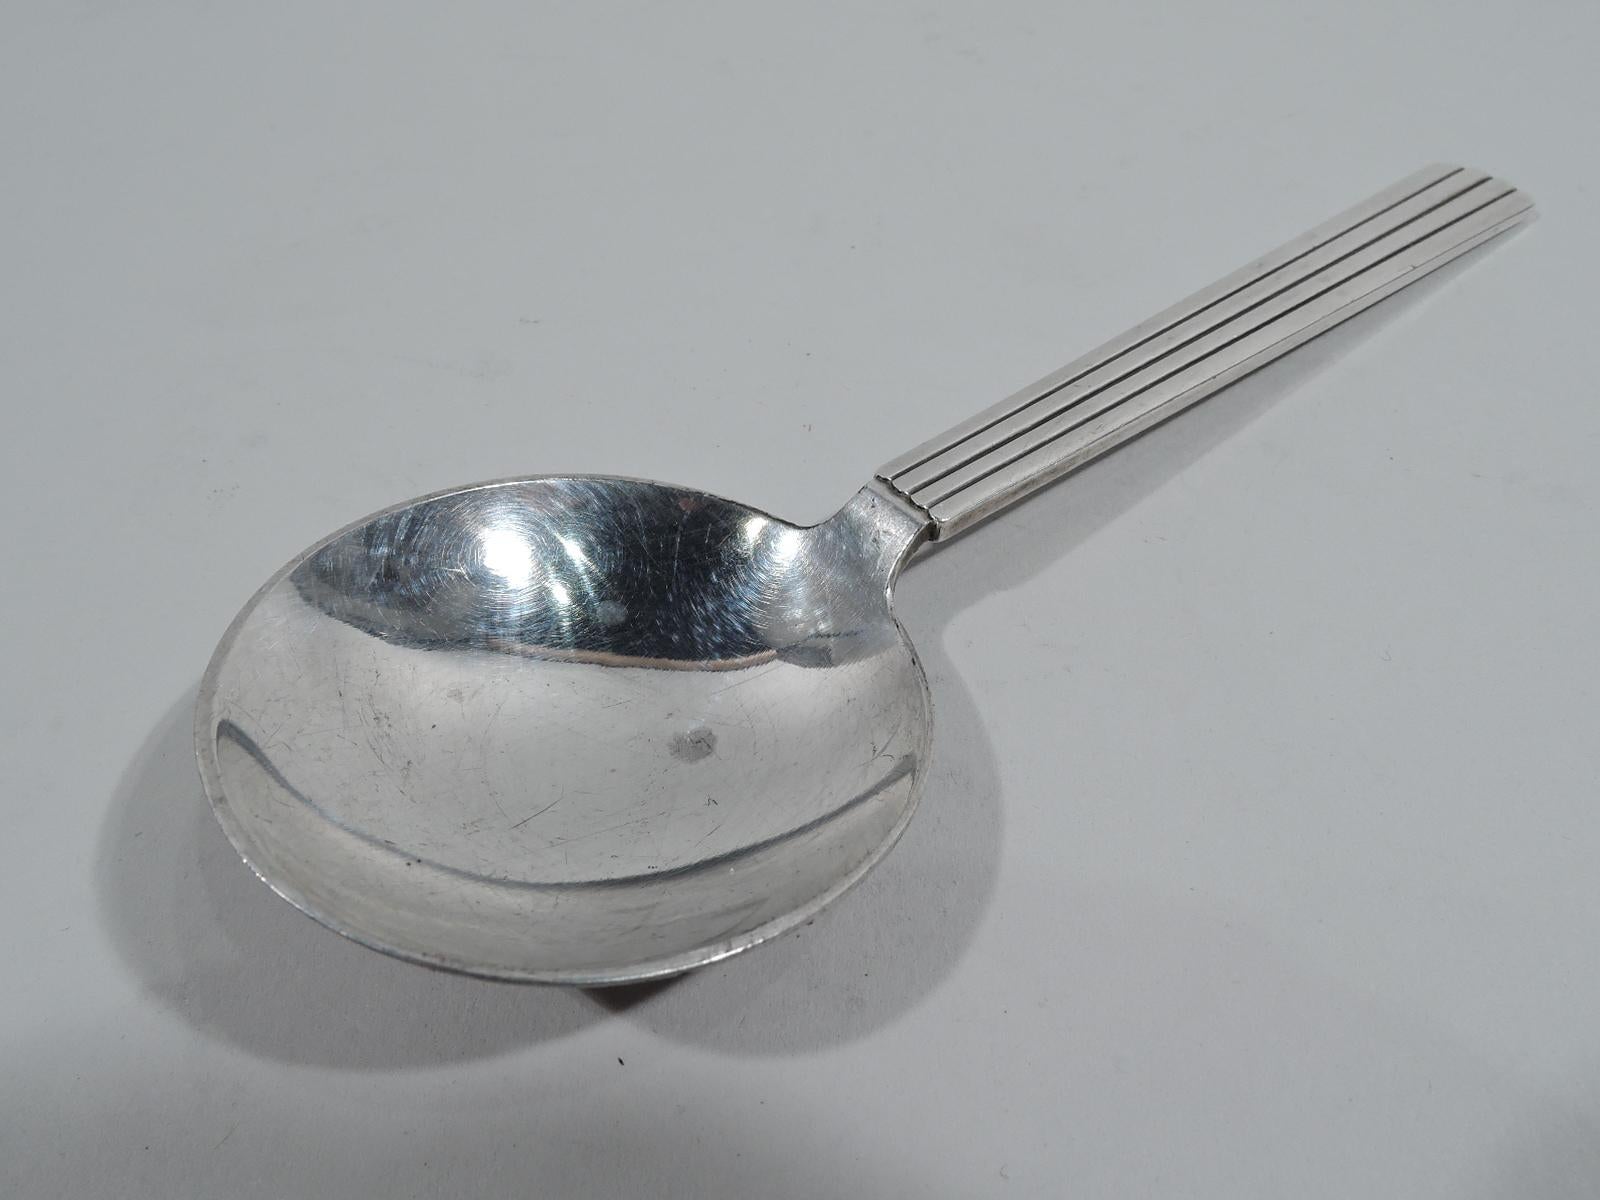 Bernadotte sterling silver cream soup spoon. Made by Georg Jensen in Copenhagen. Round bowl and tapering pilaster handle. An early piece in this pattern that was first produced in 1939. Fully marked including domestic maker’s stamp (1945-51).